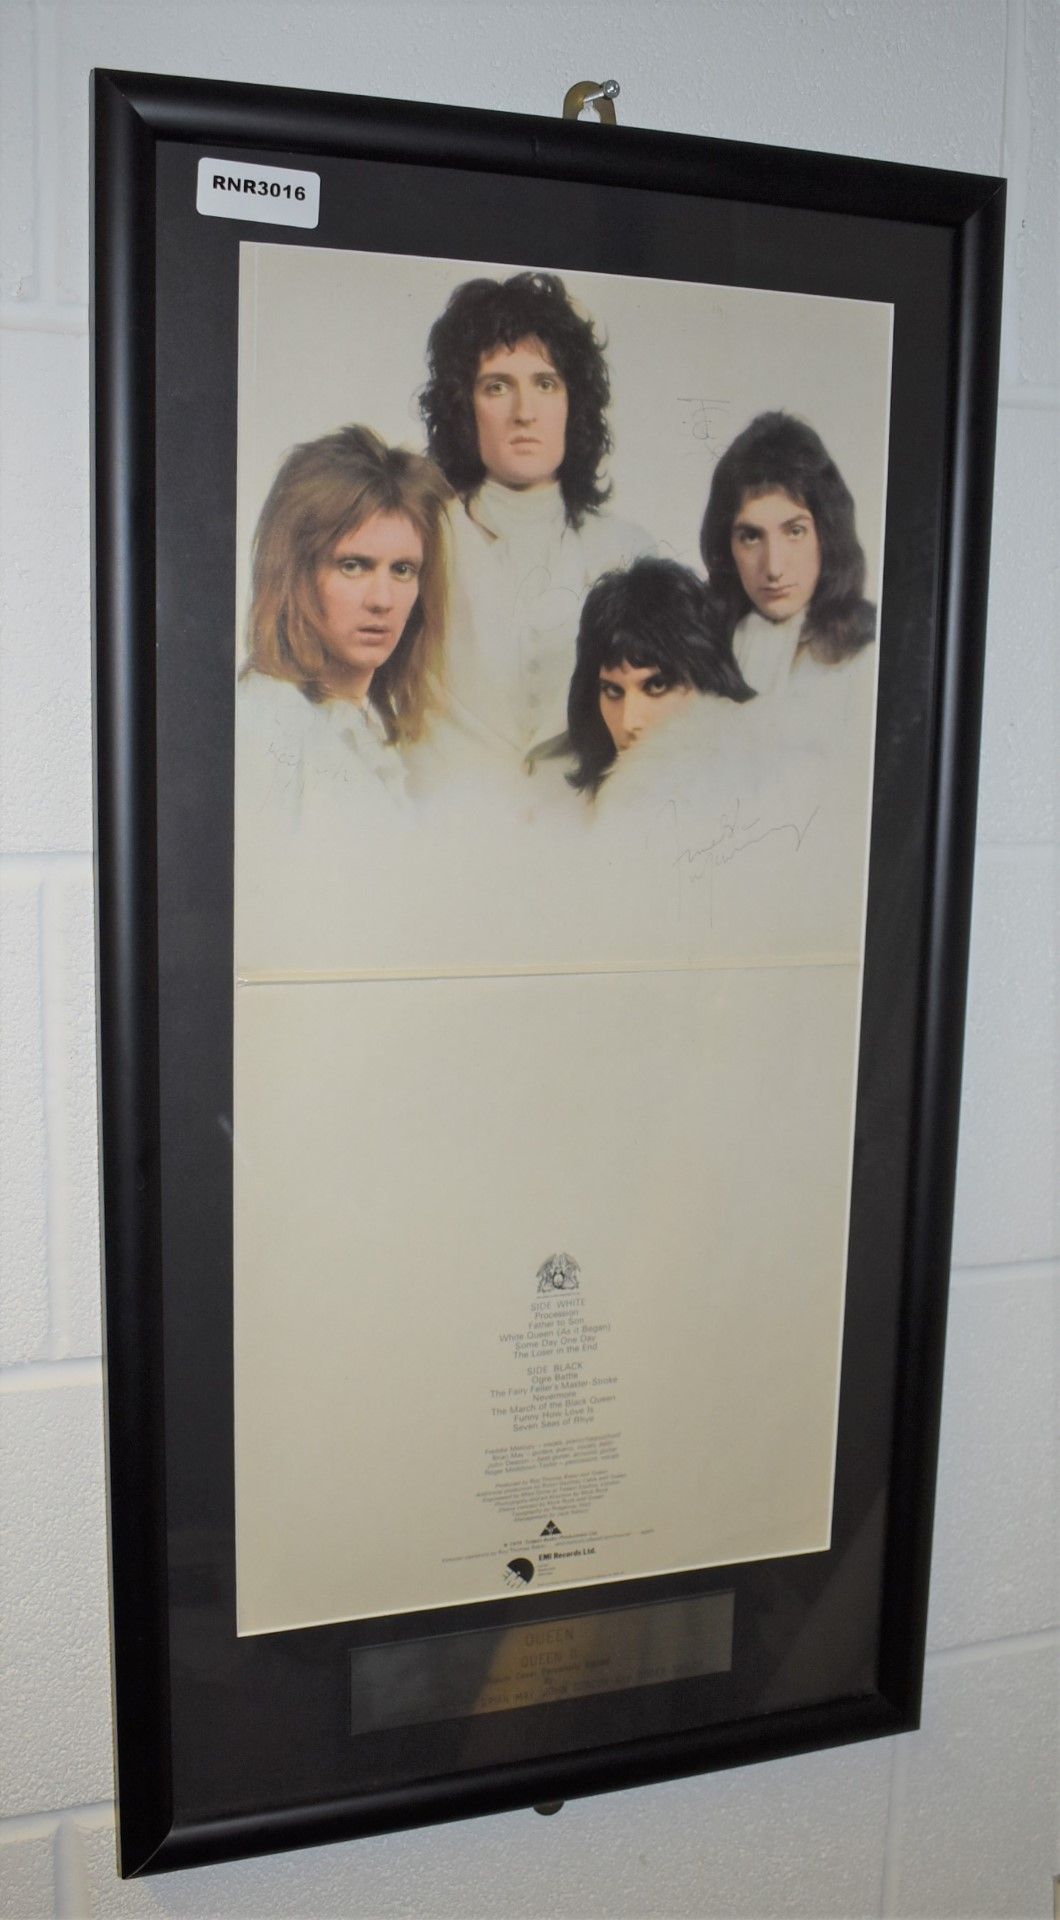 1 x Authentic QUEEN Autographs With COA - Queen Album Cover Signed By Freddie Mercury, Brian May, - Image 2 of 10